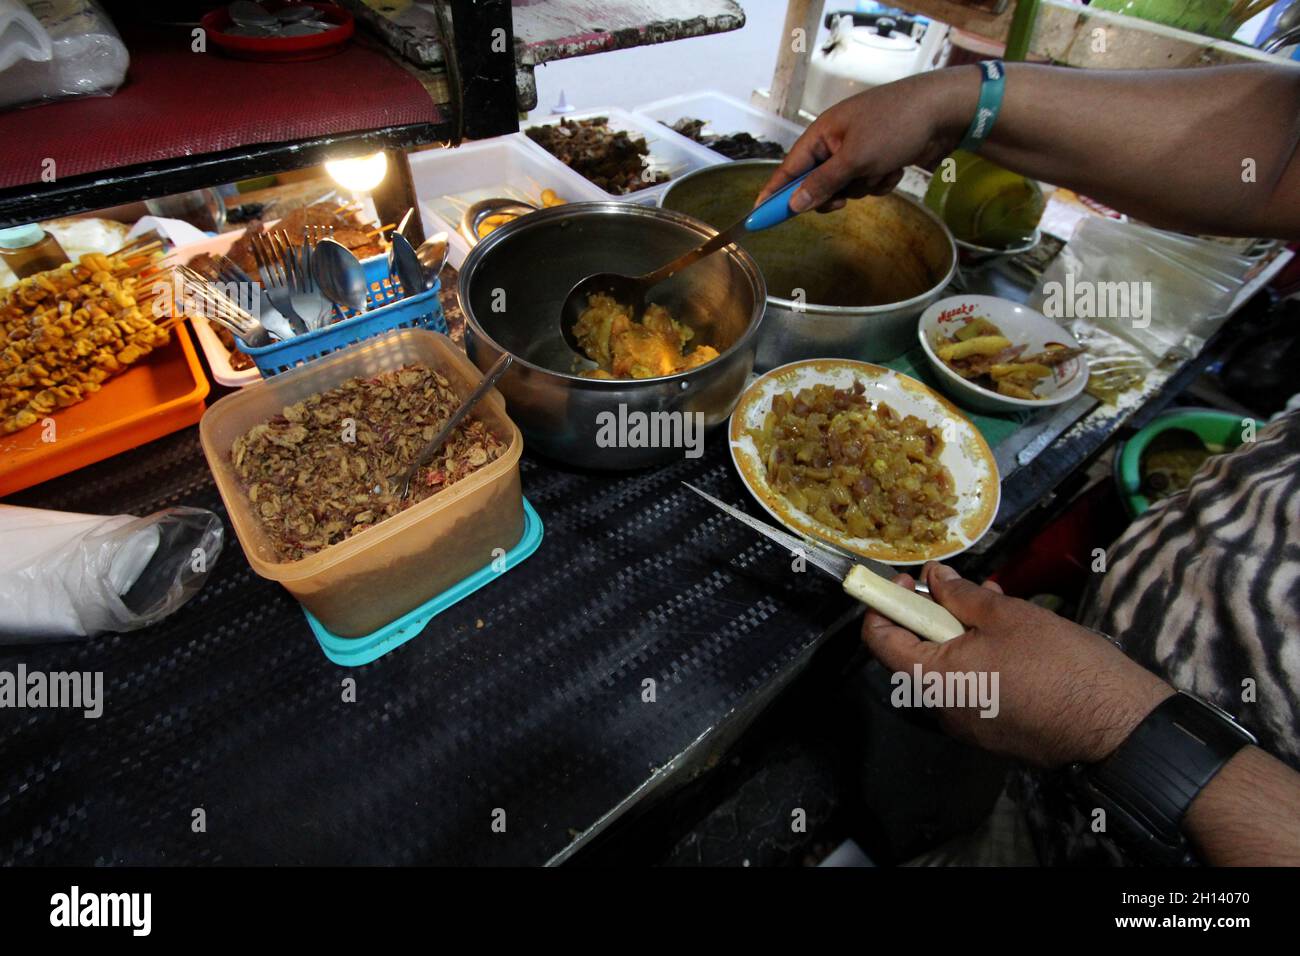 Karawang, Indonesia. 15th Oct, 2021. Endi, 39, he is one of the sons-in-law of the owner of Soto Tangkar stall Mang Nean who has been selling since 1980, is preparing food for consumers at the legendary food stall Soto Tangkar typical of Karawang on Jalan Dewi Sartika, West Karawang, Karawang, West Java, Indonesia. This soto dish uses beef ribs and beef leg veins seasoned with turmeric and chili. It tastes savory and slightly sweet. Interestingly, this delicious dish is cooked traditionally. Almost all ingredients are steamed in a pot over coals of firewood. The growth of micro, small and medi Stock Photo